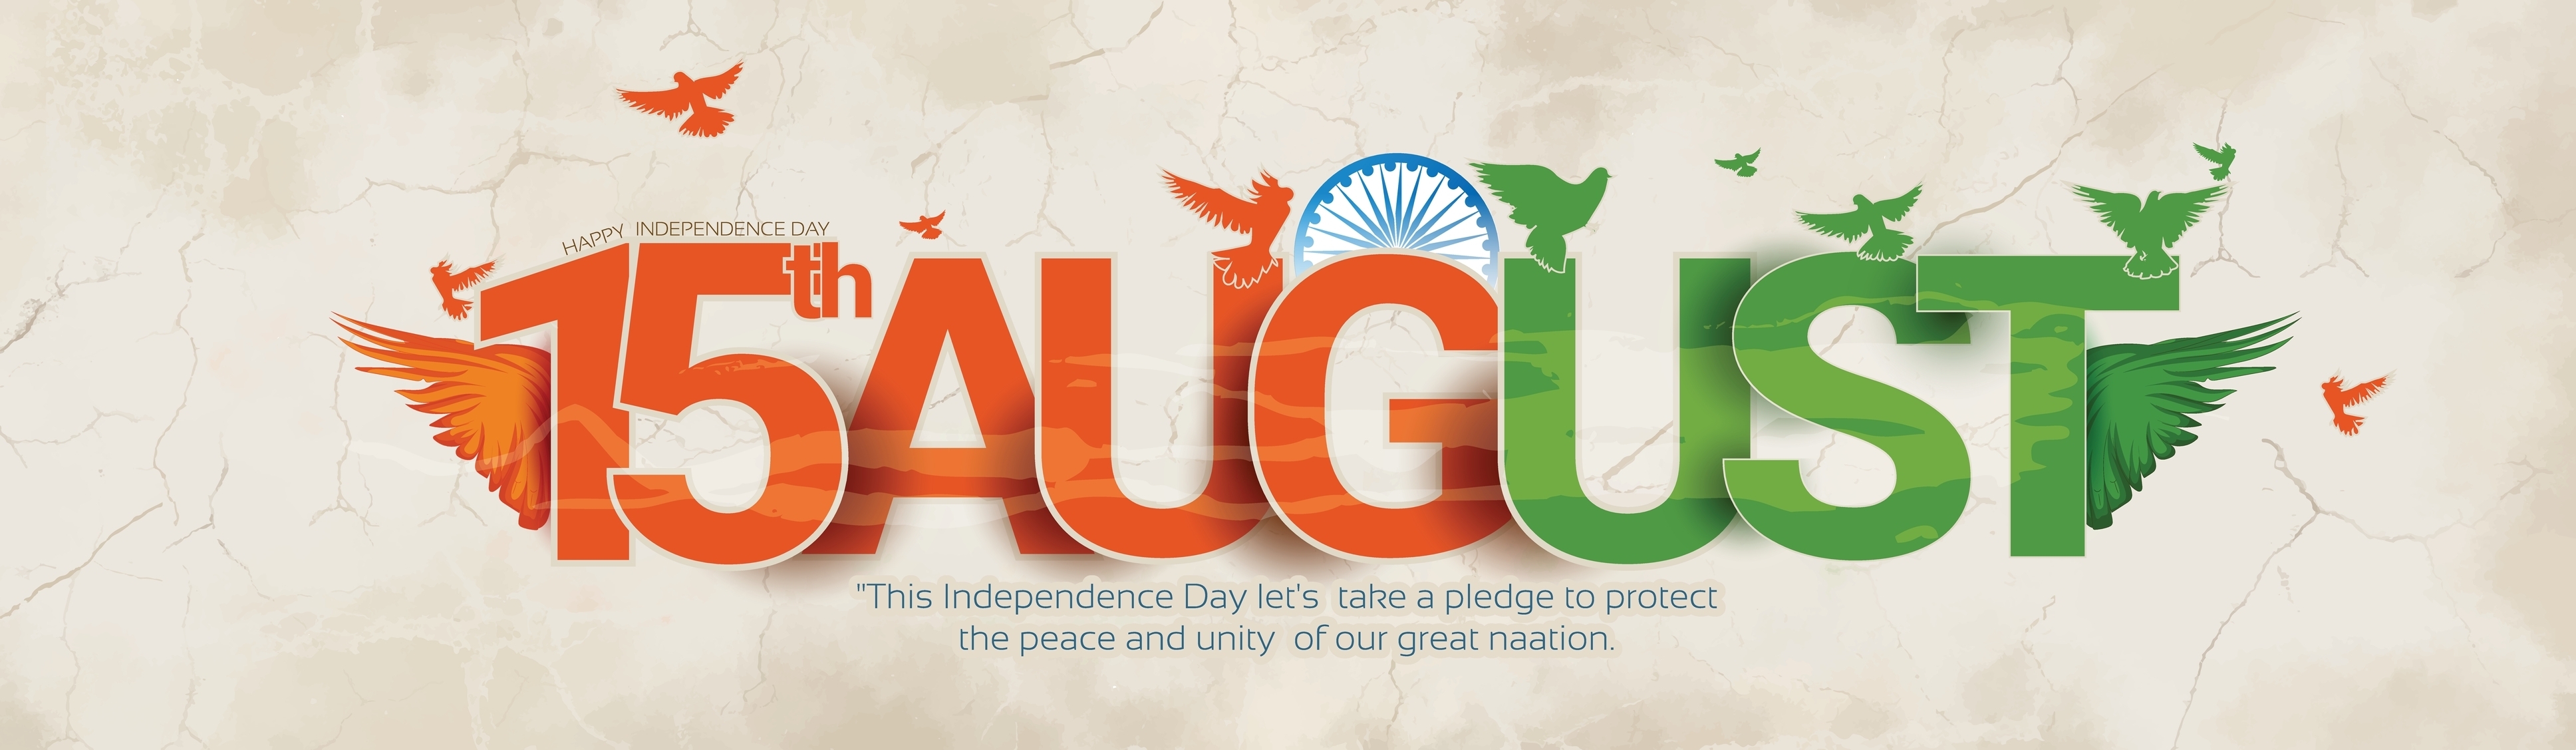 Happy Independence Day 2023 Wishes: Spread the Spirit of Patriotism with 77  Quotes, Images, Gif, Messages, Slogans, and Greetings - News18